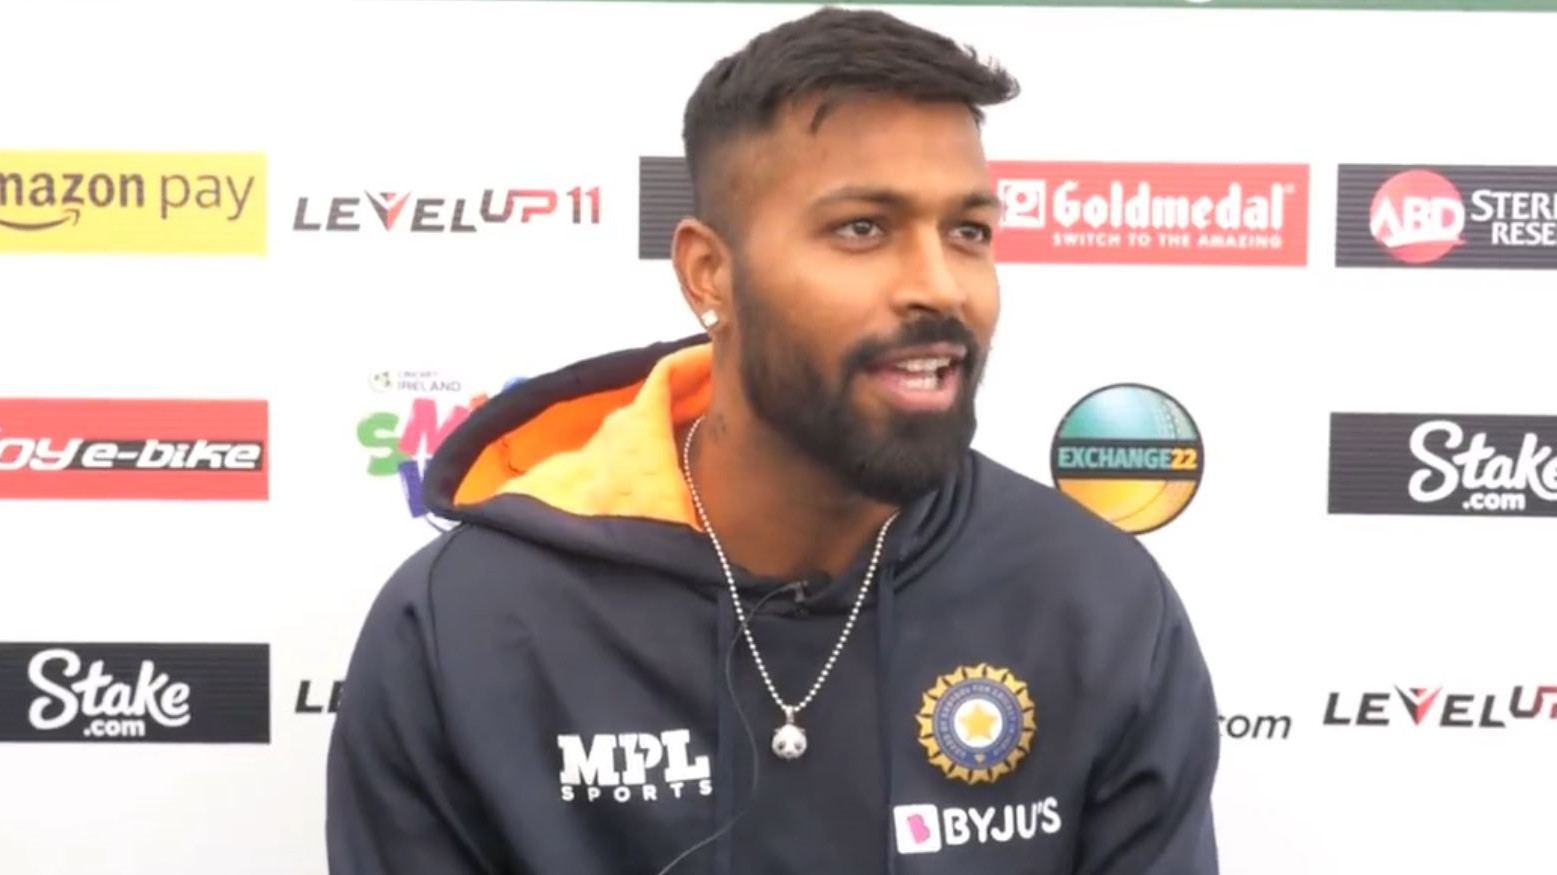 IRE v IND 2022: 'There will be a couple of caps given' - Hardik Pandya hints at debuts in Ireland T20I series